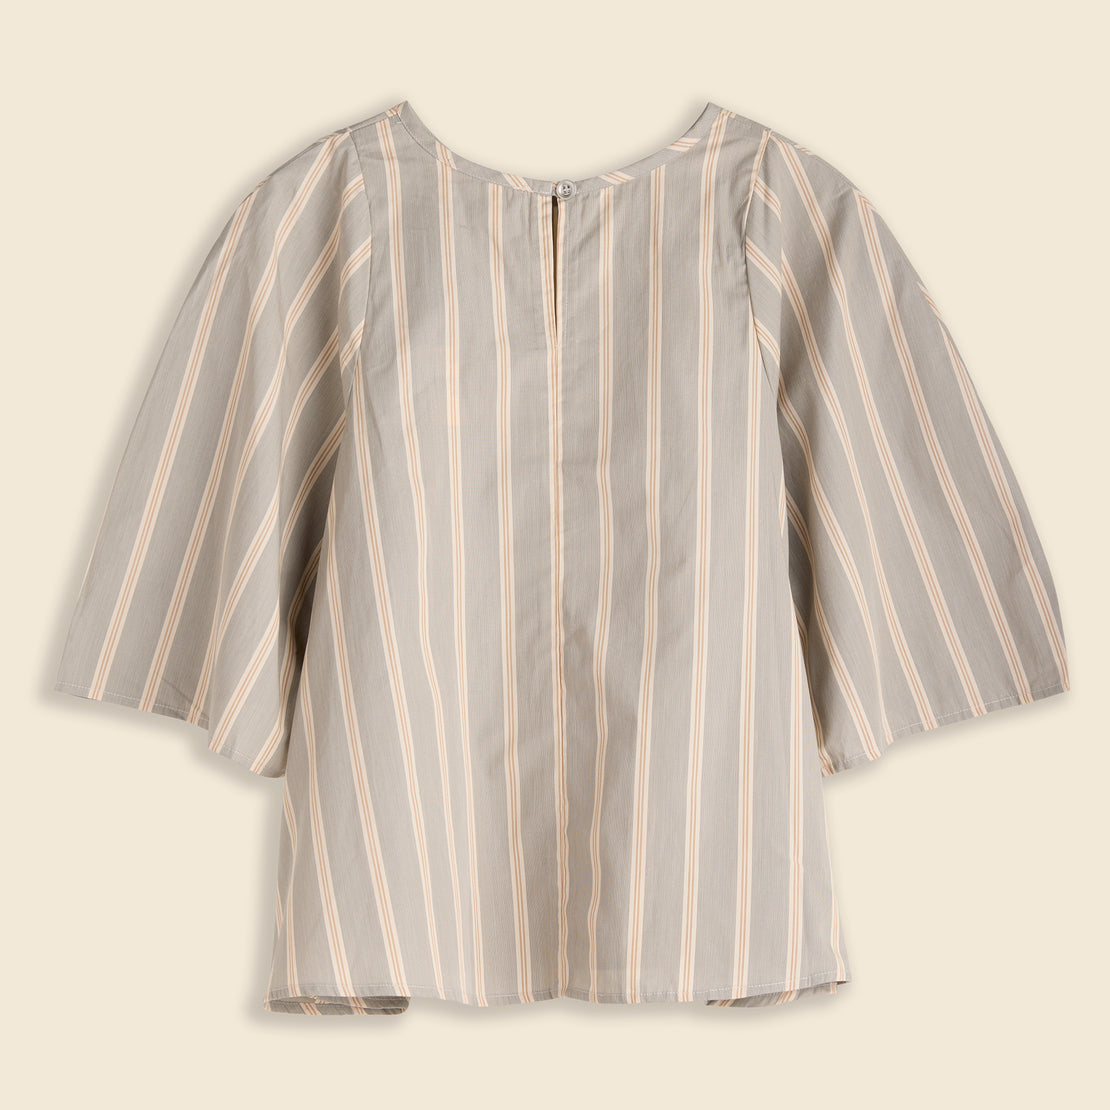 Willow Top - Grey Quill Stripe - Atelier Delphine - STAG Provisions - W - Tops - S/S Woven